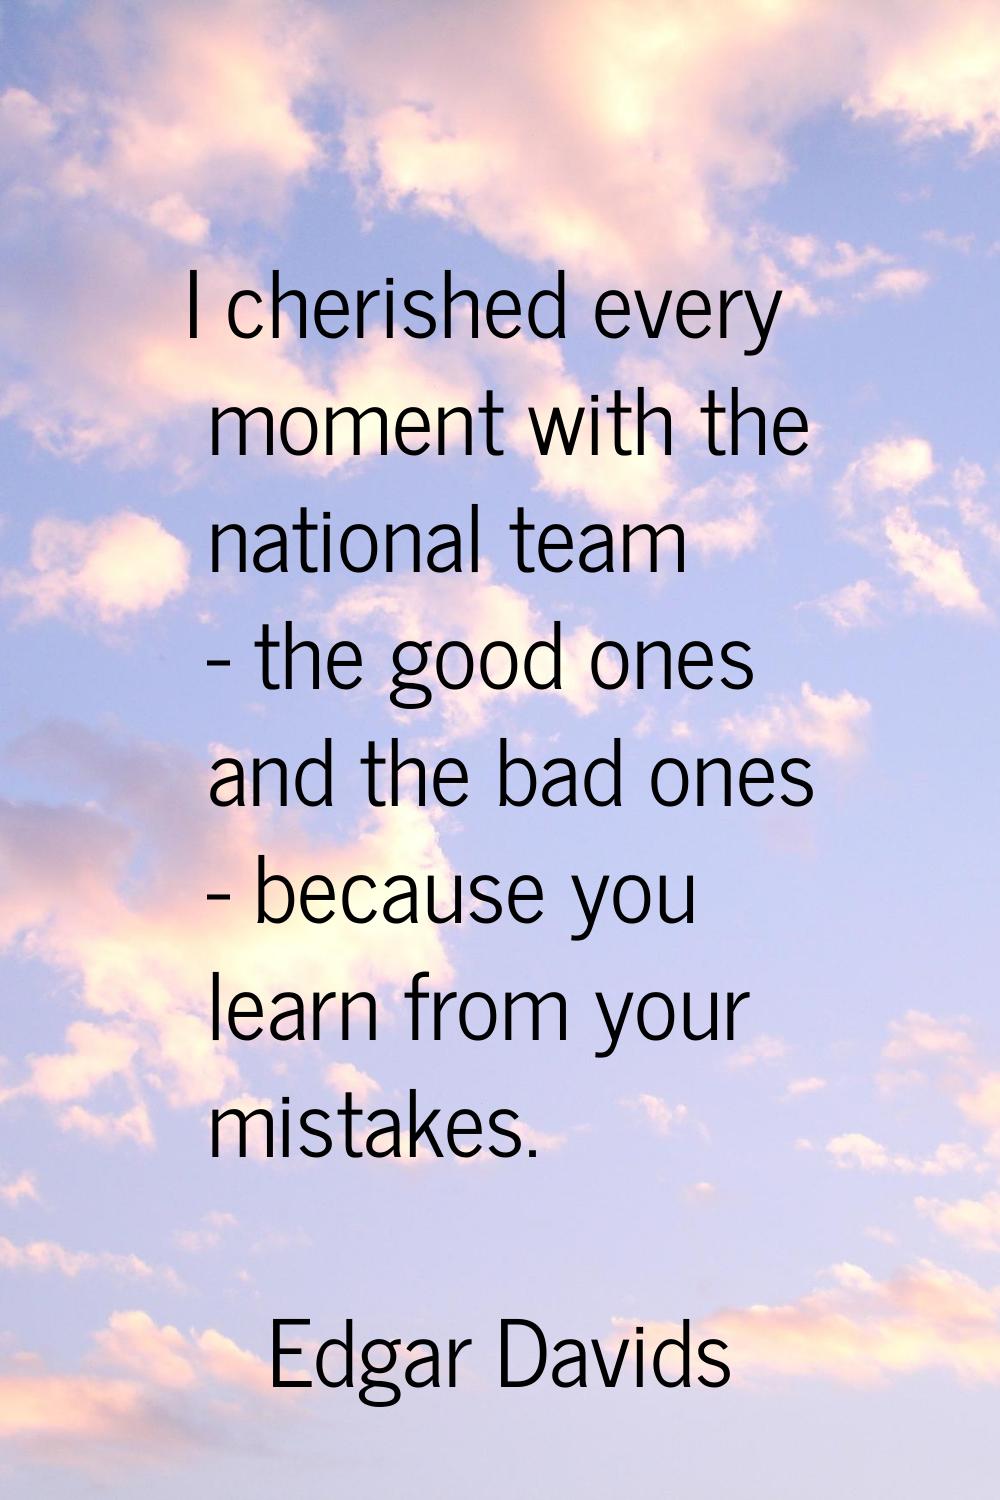 I cherished every moment with the national team - the good ones and the bad ones - because you lear